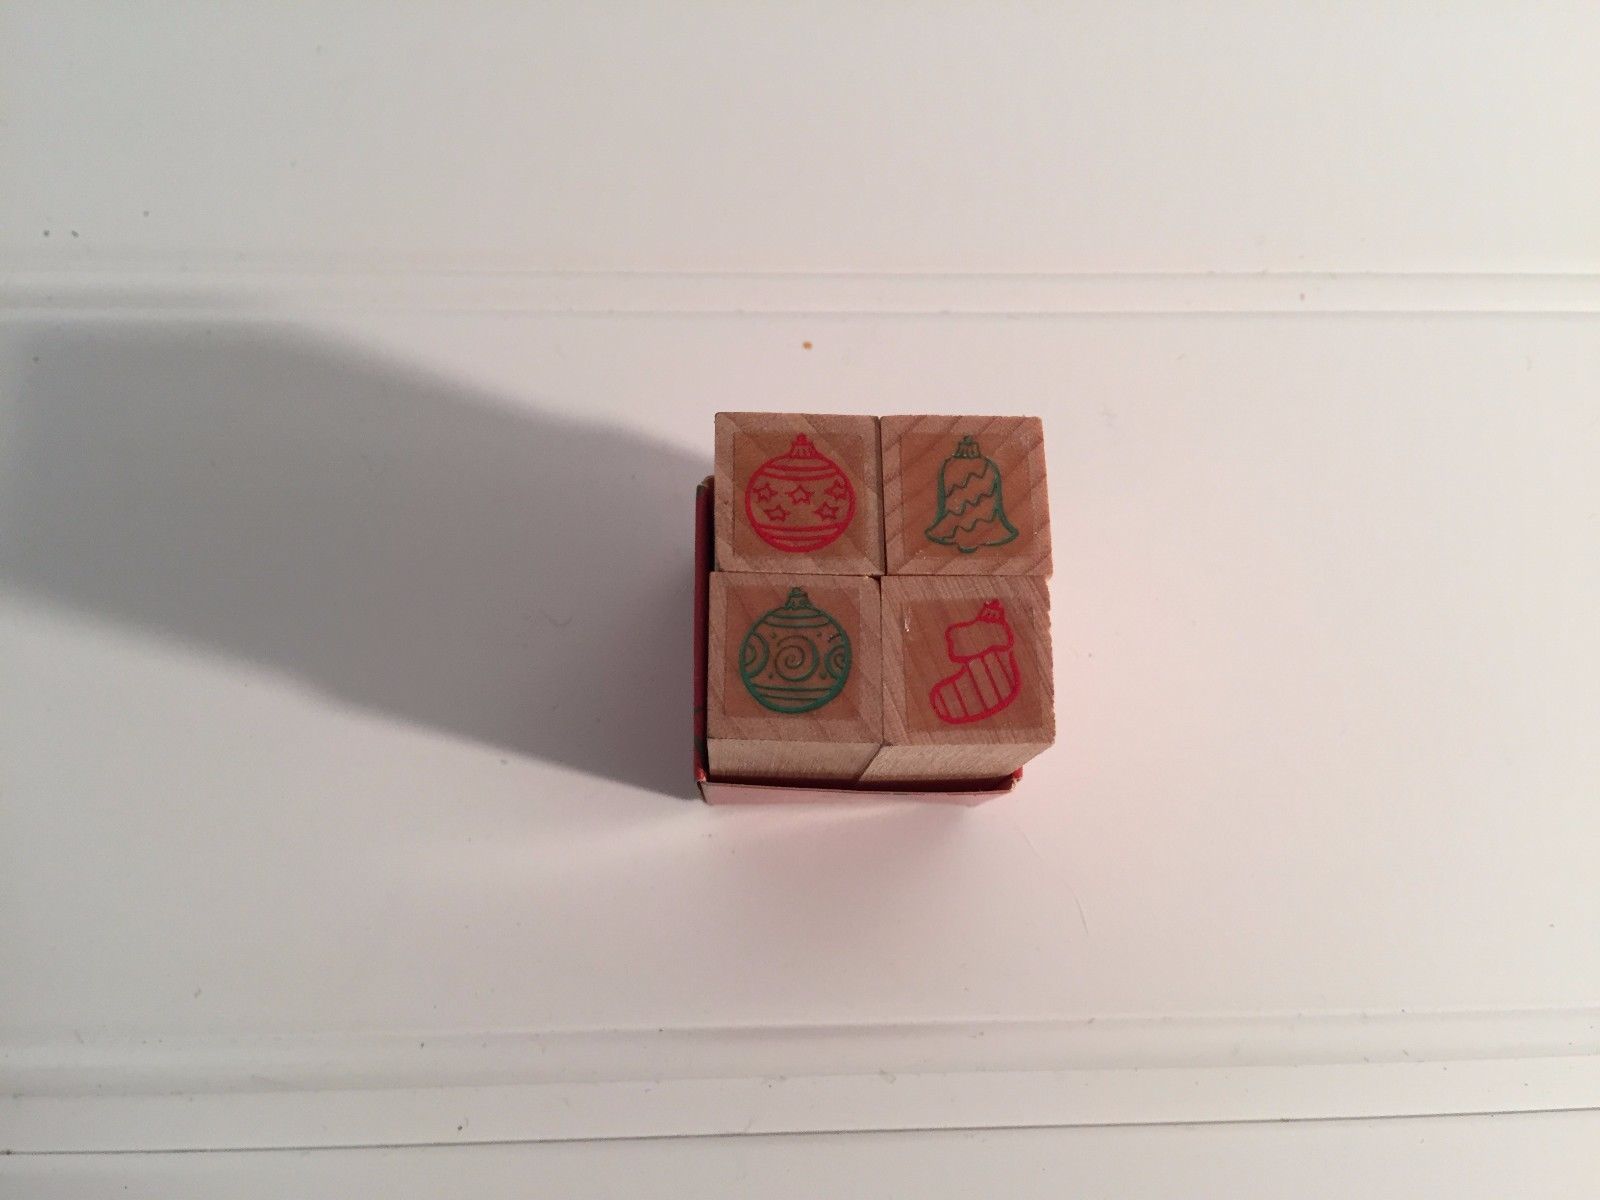 Lot 4 vintage Hero Tiny Ornaments Stamp Set Stamps Ornament 20291 NEVER USED - $13.99